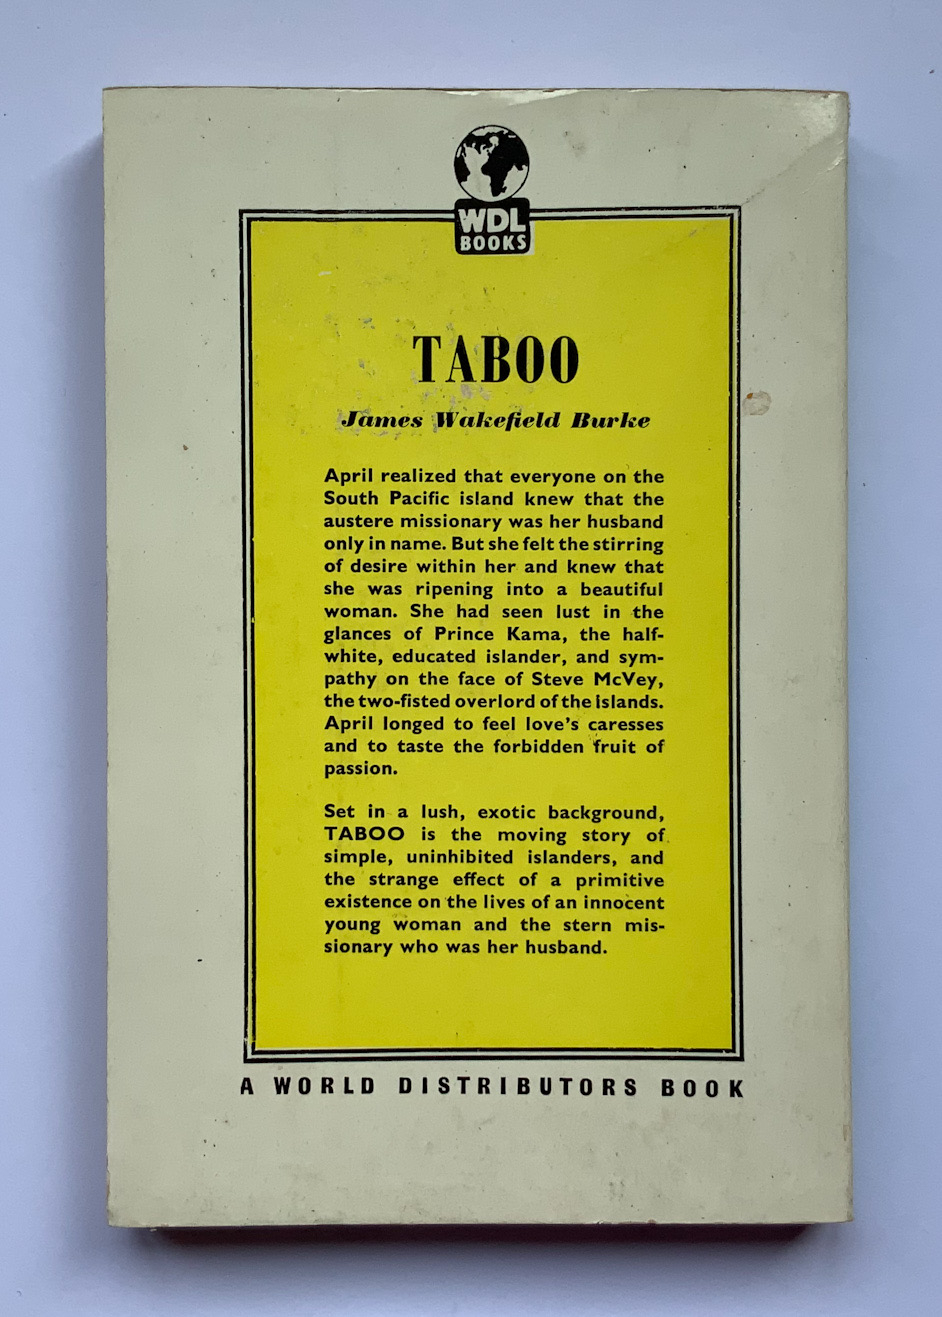 TABOO romance risque pulp fiction book by James Wakefield Burke 1959